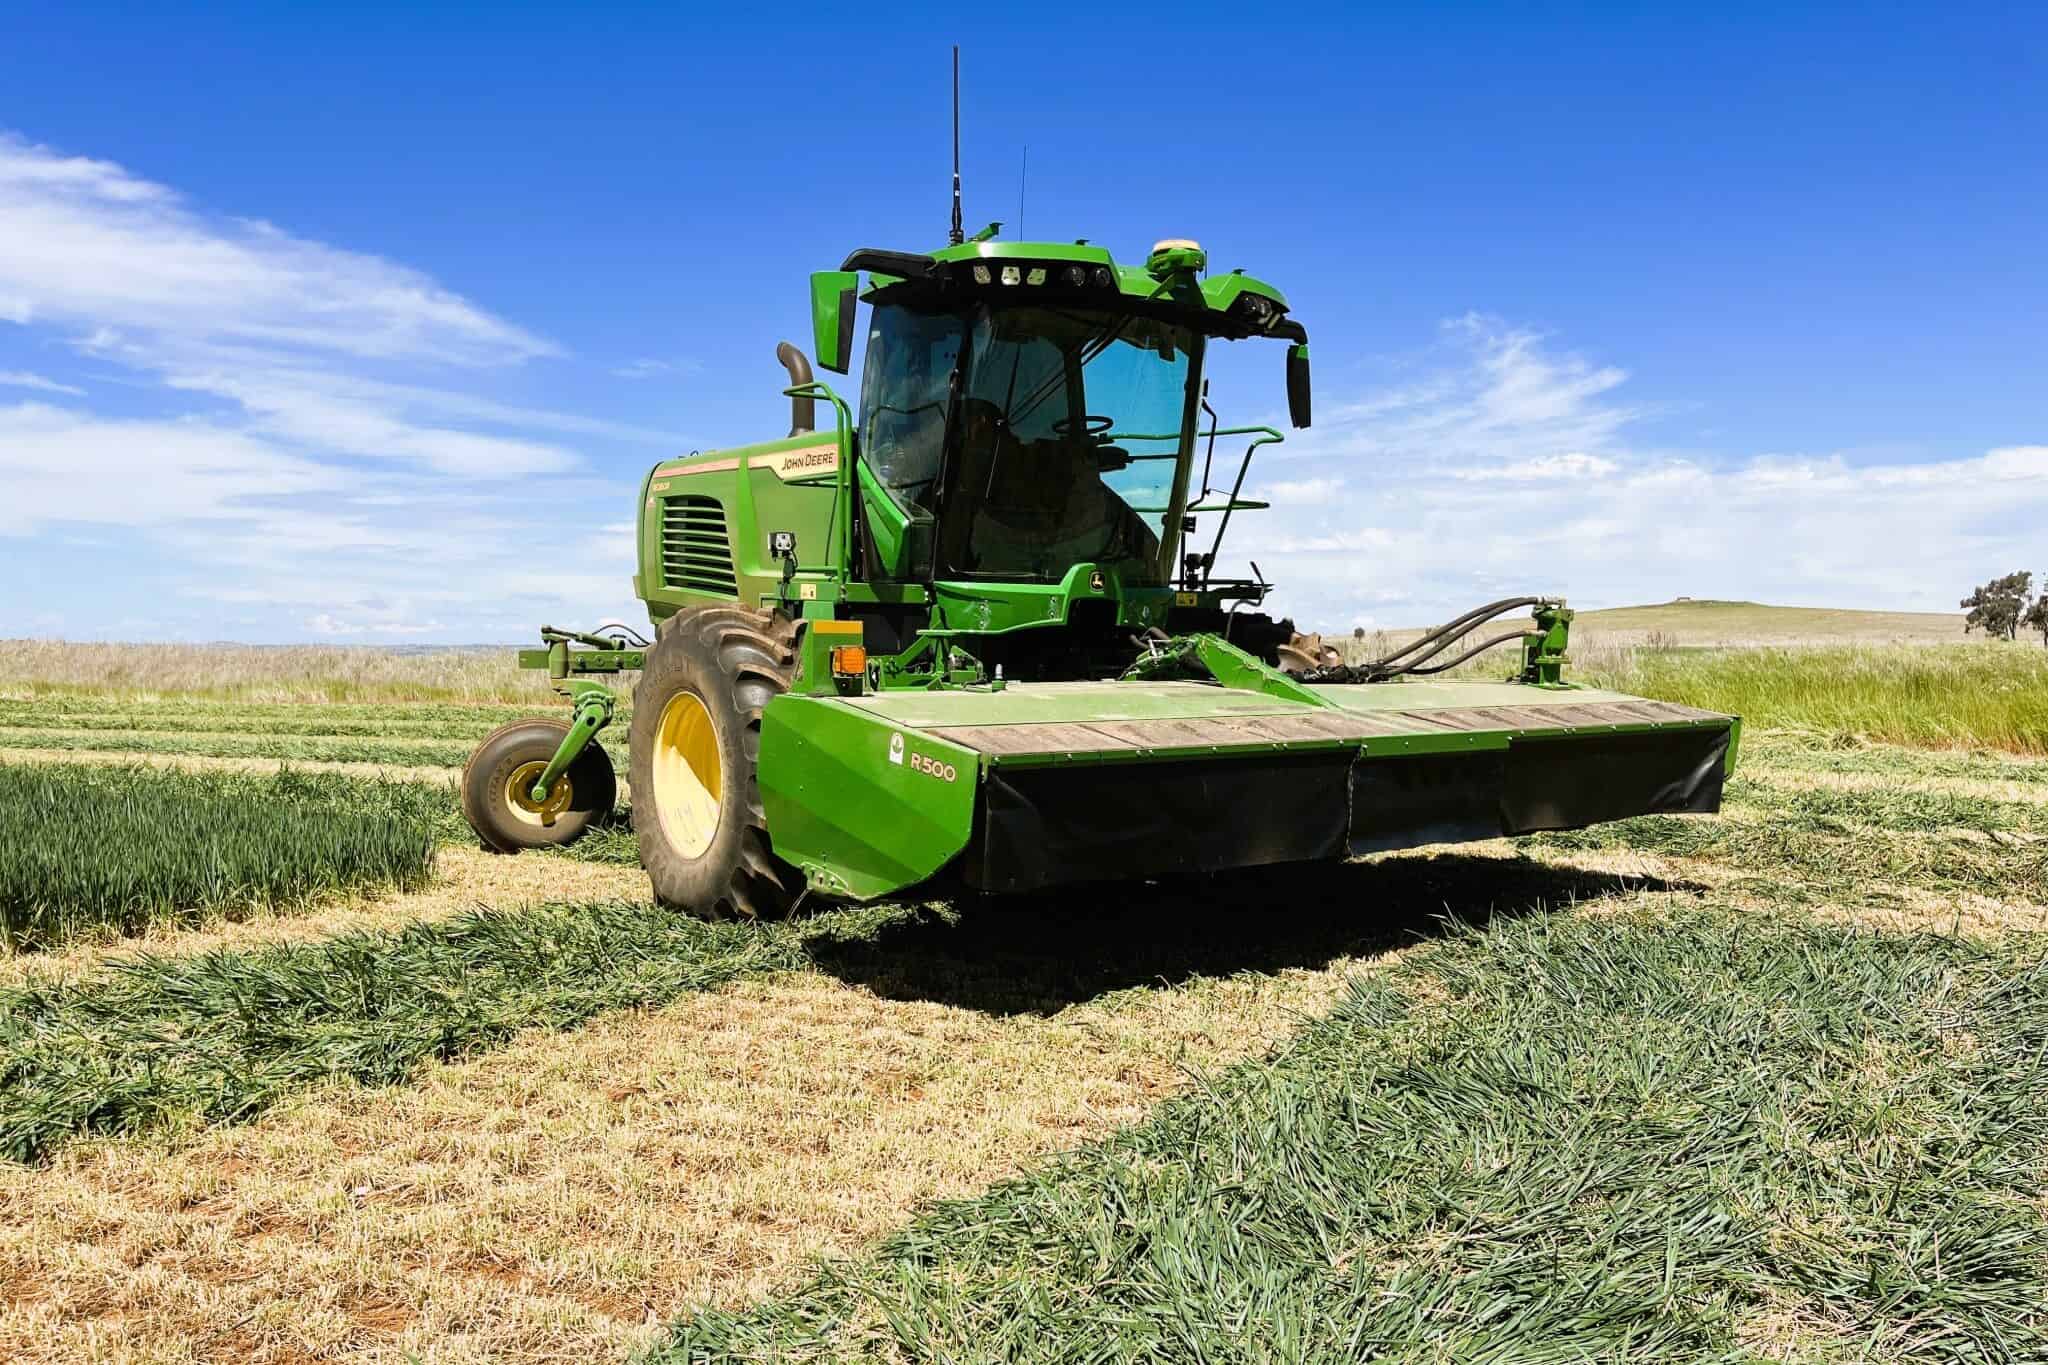 Large green farm equipment sits in a green paddock with freshly cut hay